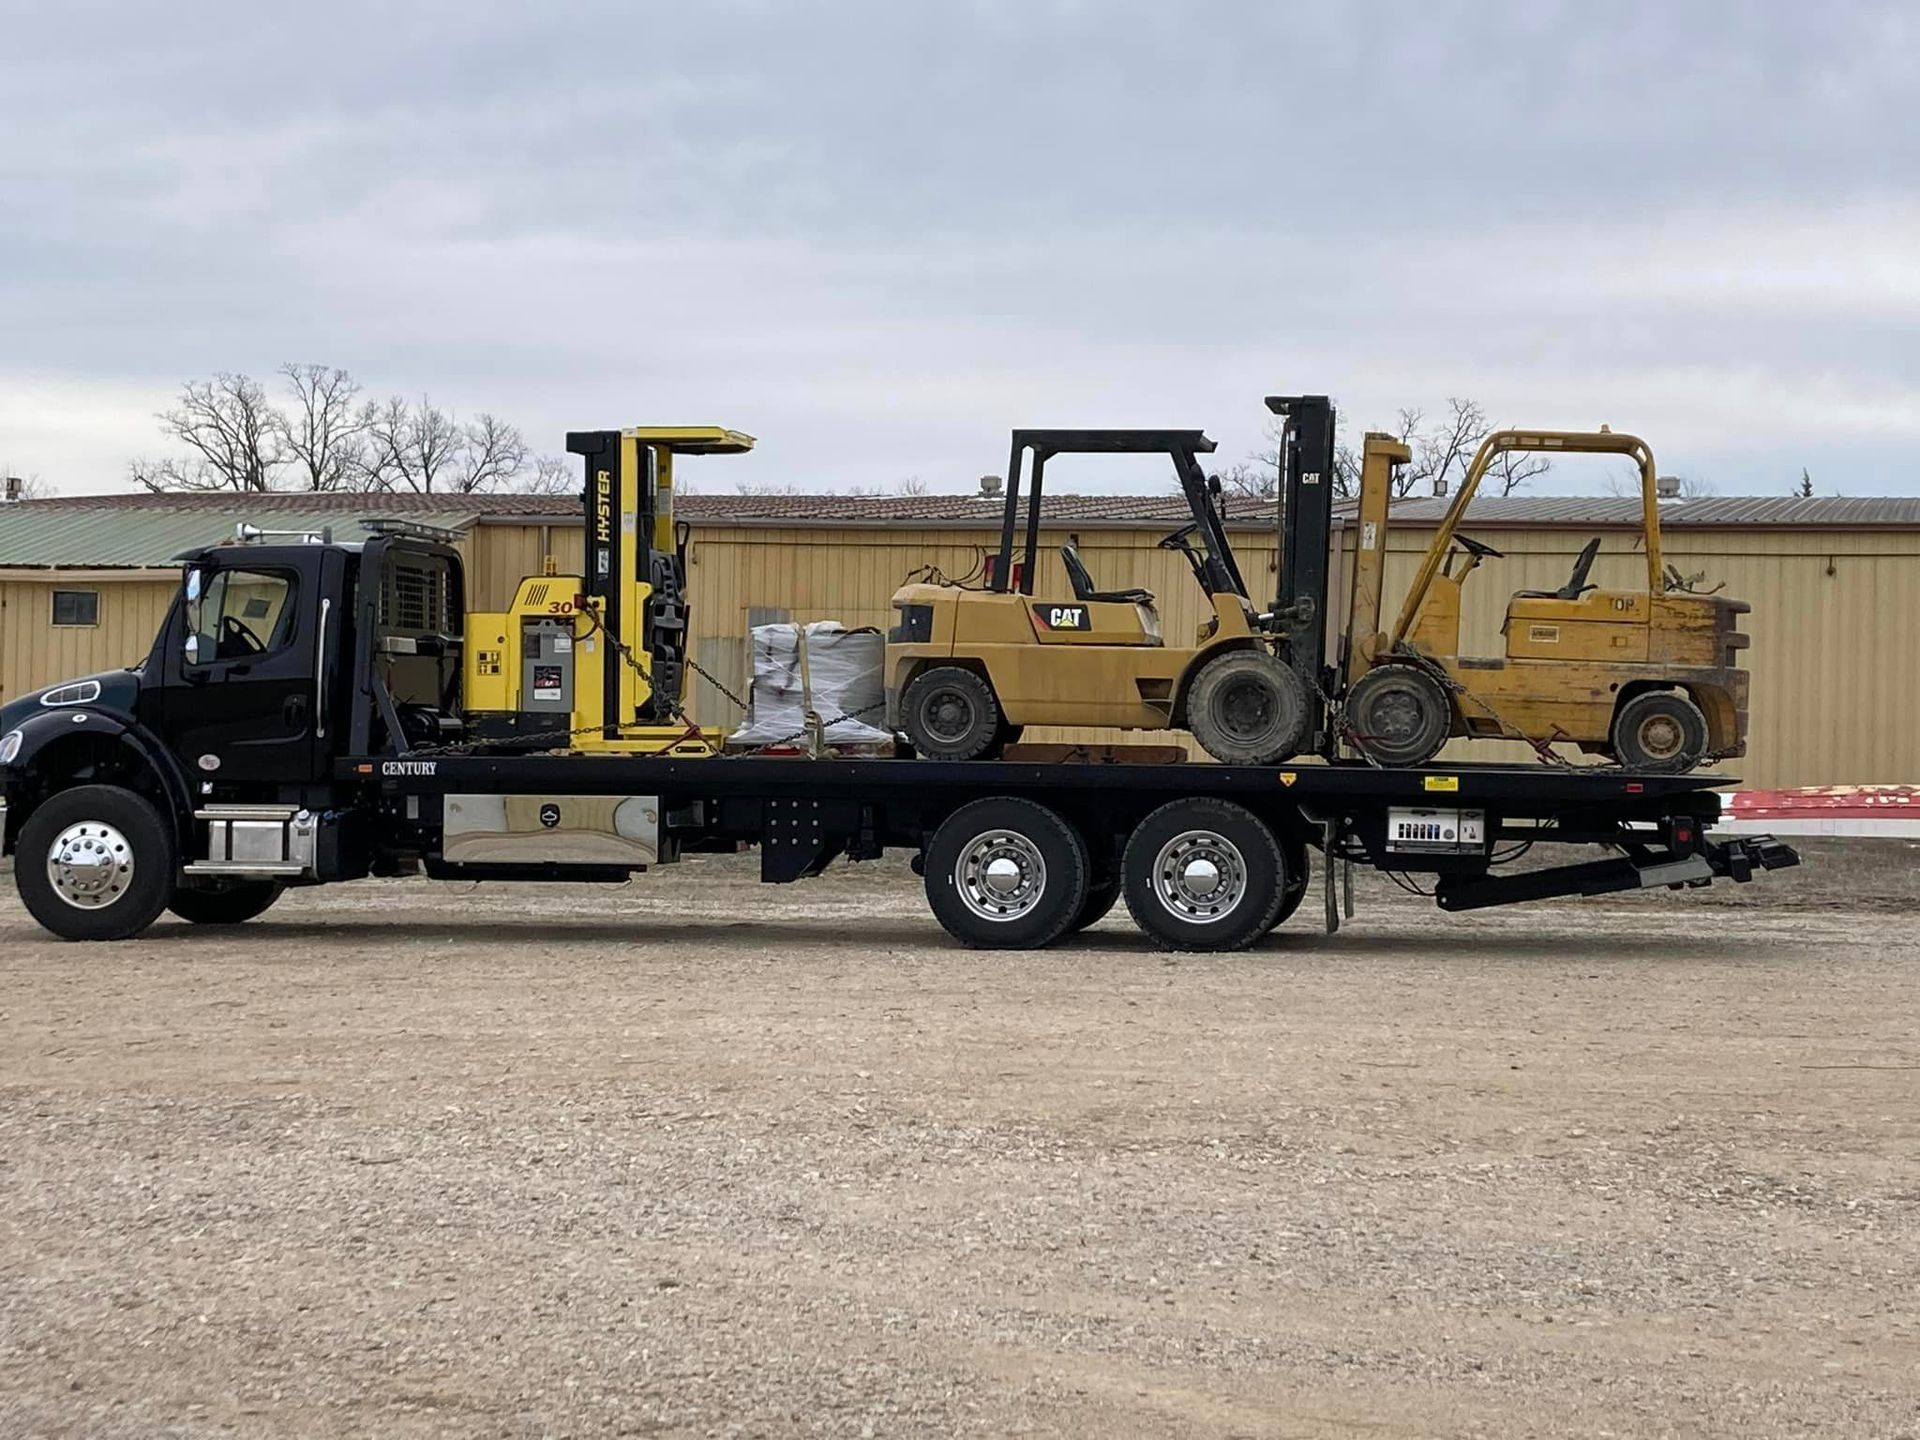 For Transporting Heavy Equipment in Columbia, MO, Call Tiger Towing for Hauling Service.